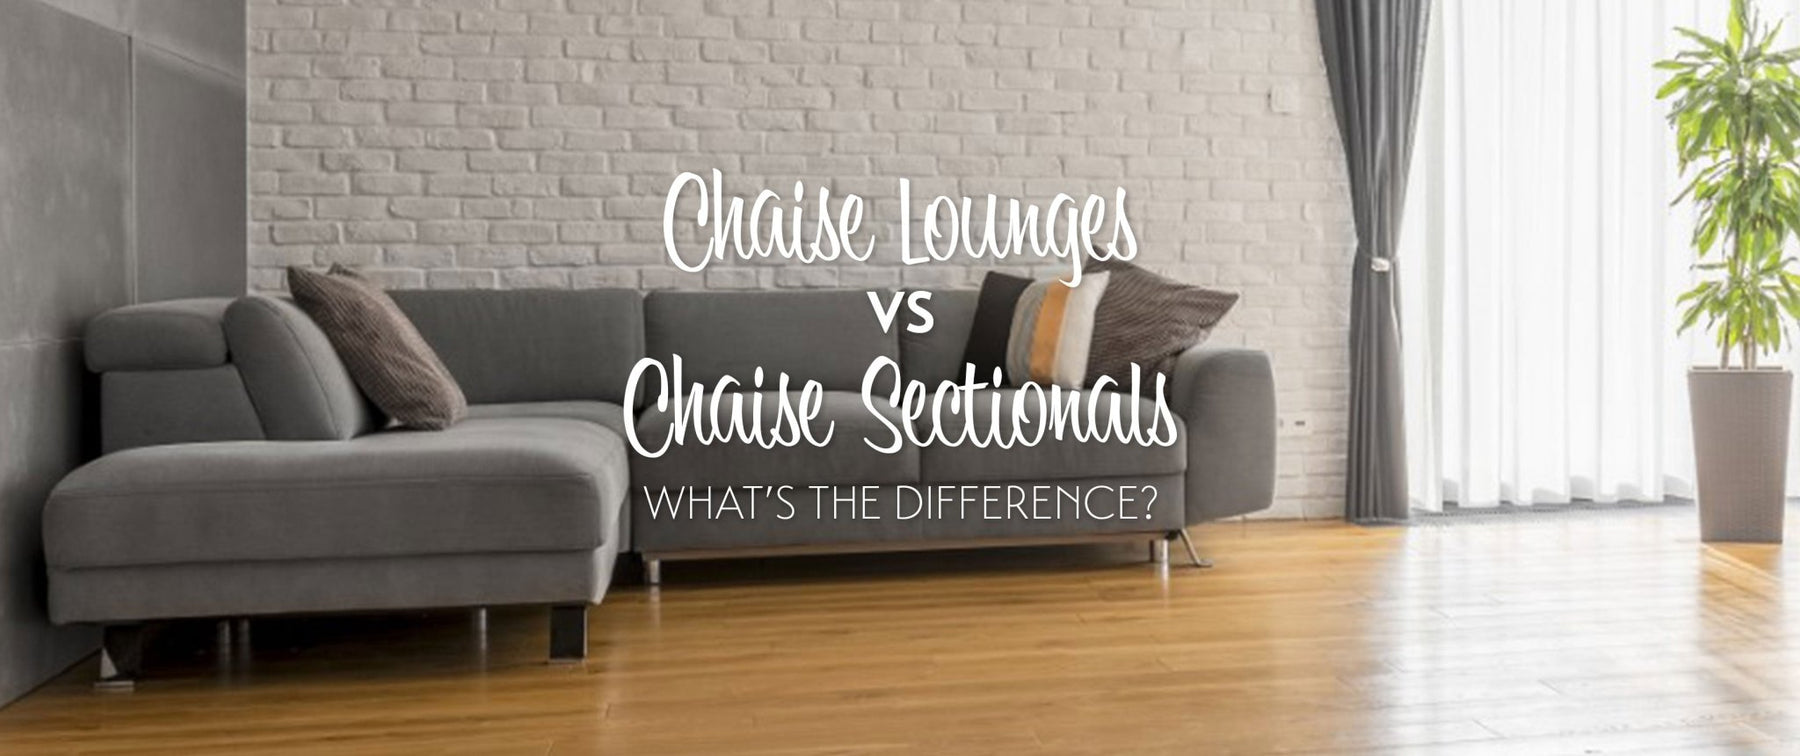 Chaise Lounges vs. Chaise Sectionals: What's the Difference?